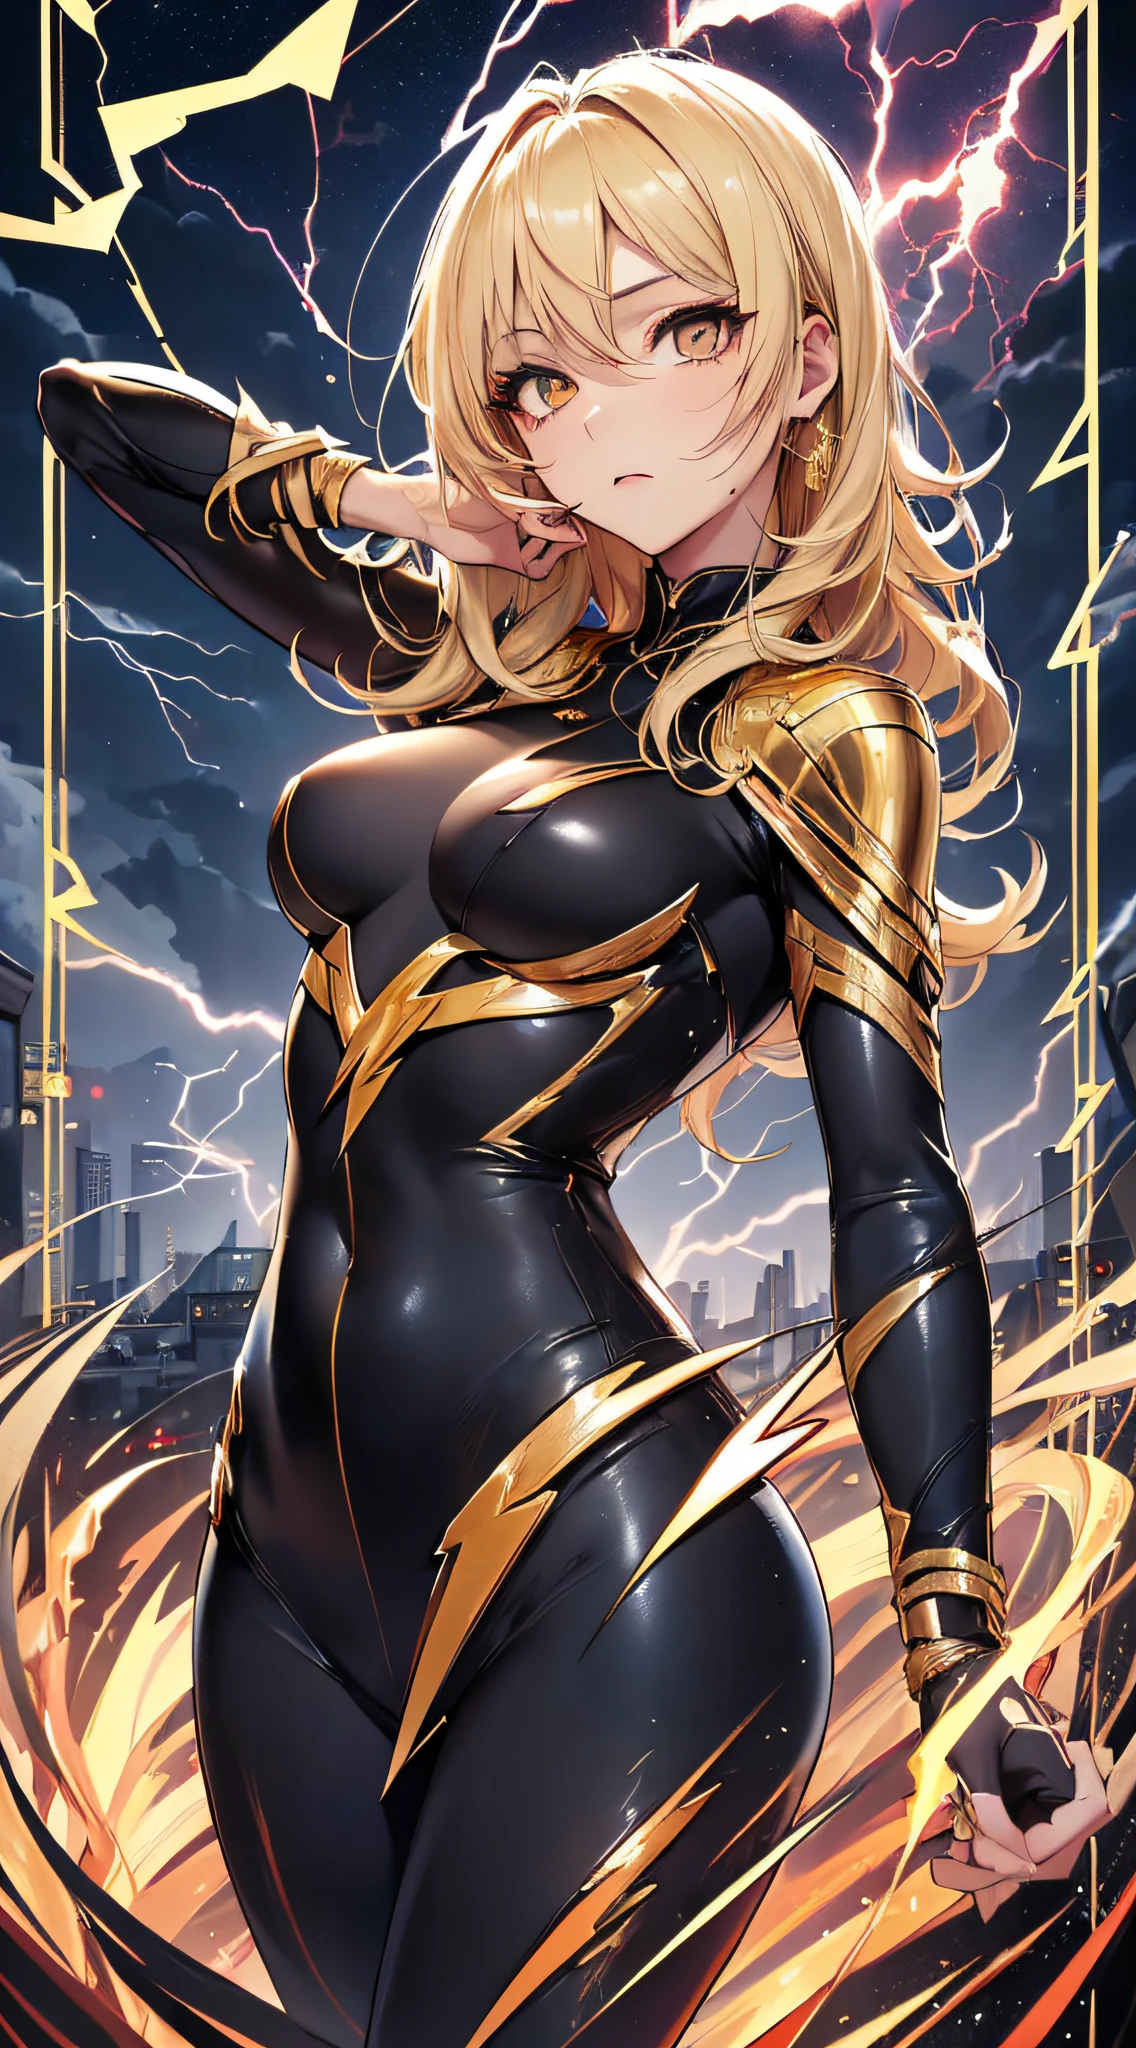 top-quality、Top image quality、​masterpiece、girl with((18year old、Best Bust、big bast、Bust 85,beautiful golden eyes、Breasts wide open,Blonde long hair、A slender、Large valleys、Gold Bodysuit,Reflecting the whole body、Open your arms、Gold ring on wrist、Shoot lightning from your hands、posterior view、Turn around、emphasis on the buttocks)）hiquality、Beautiful Art、Background with((nigh sky、black clouds、lightning bolt、Intense thunder、Thunderbolt、Red thunder、Blue lightning strike、Gold Thunder)))masutepiece、visualart、depth of fields、sky at night